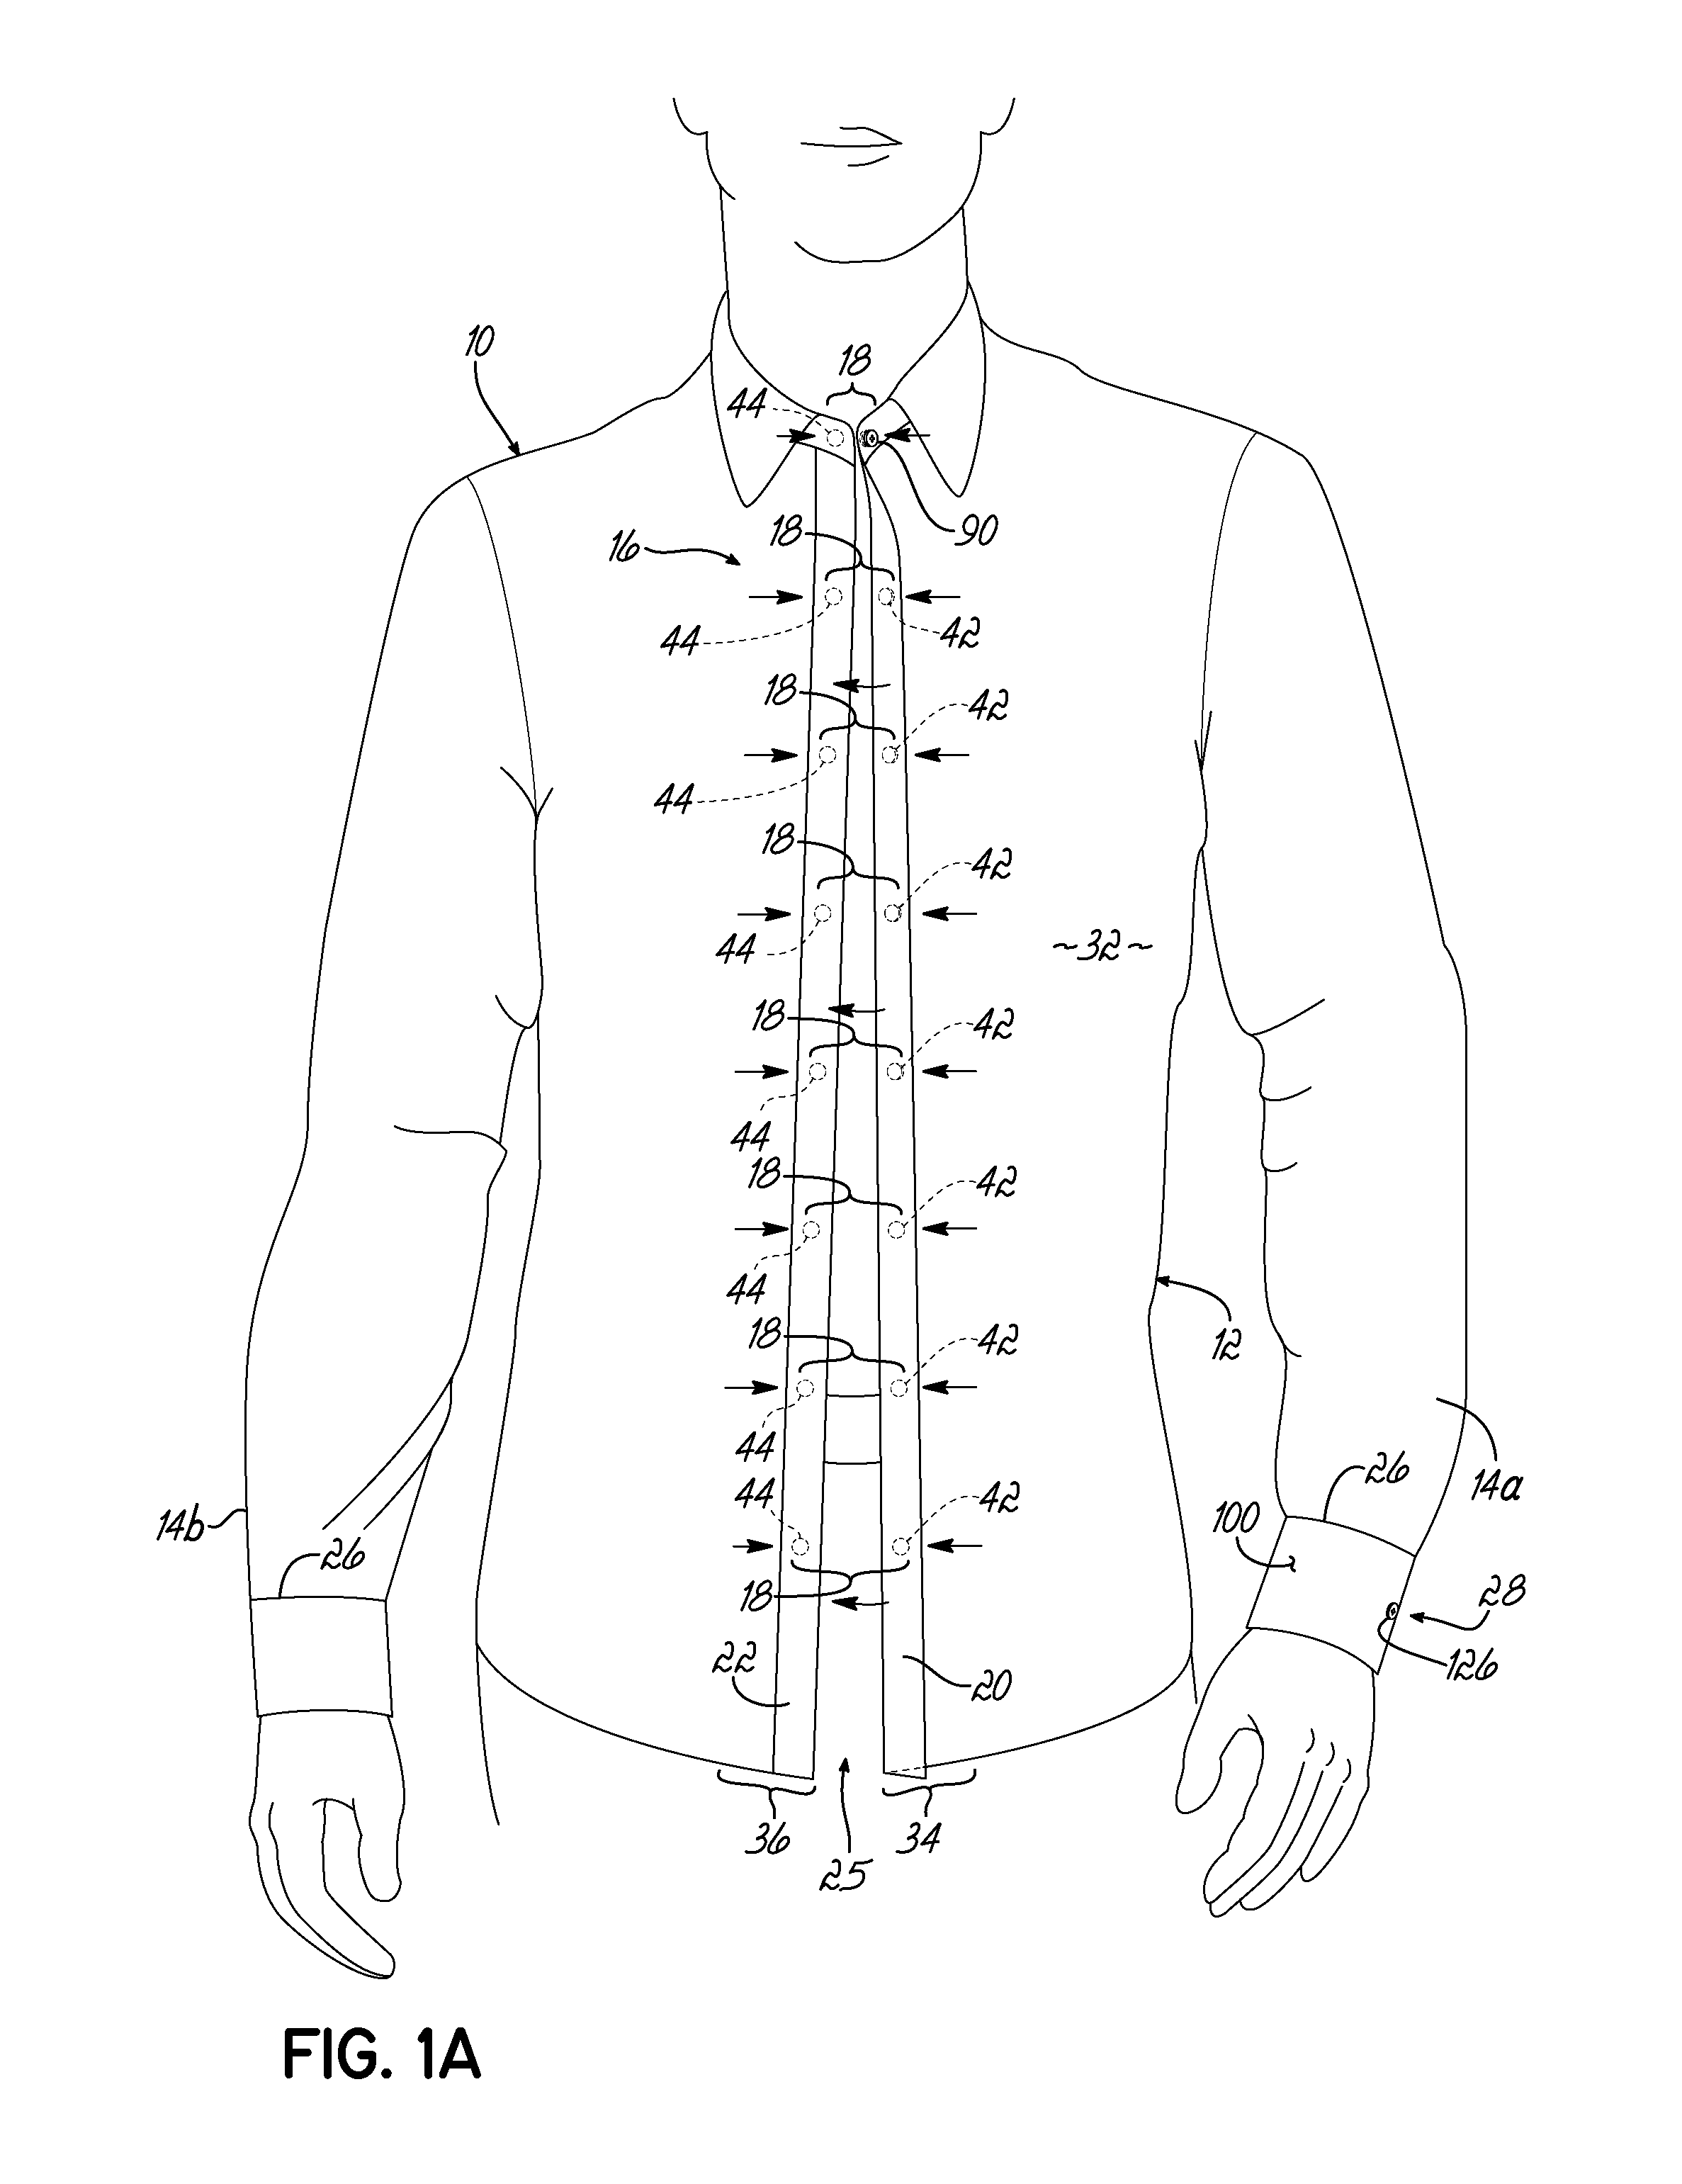 Article of Clothing Having Magnetic Fastening Assemblies